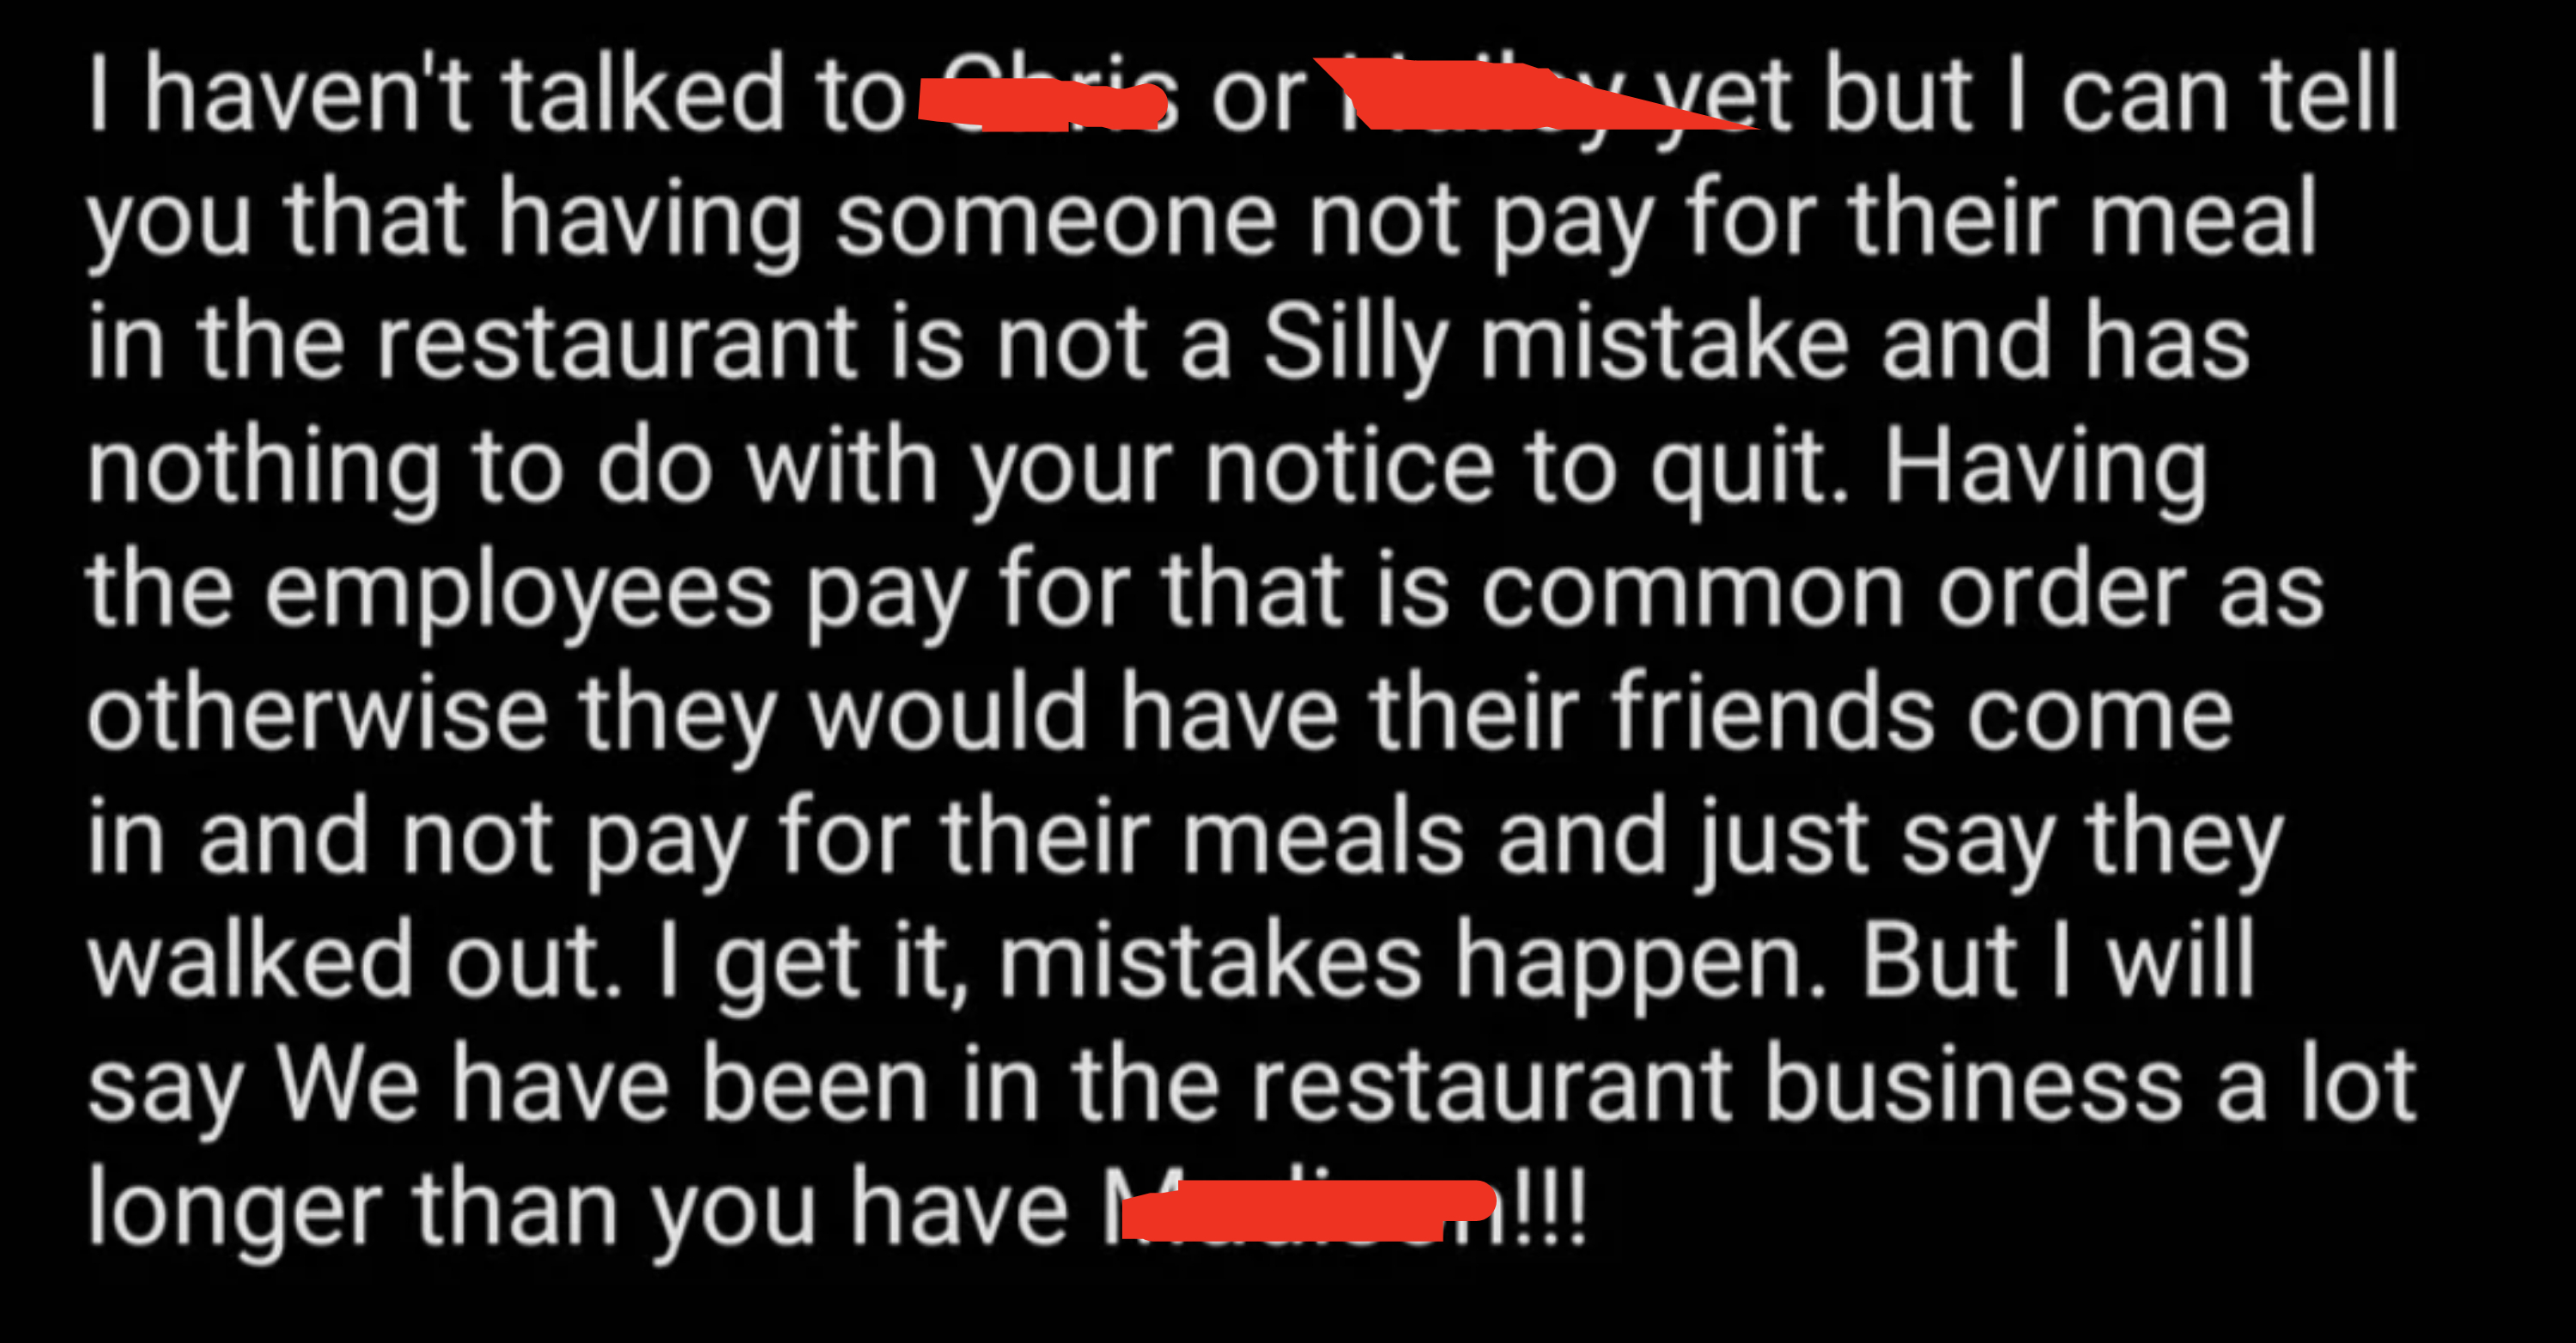 &quot;Having the employees pay for that is common order&quot;